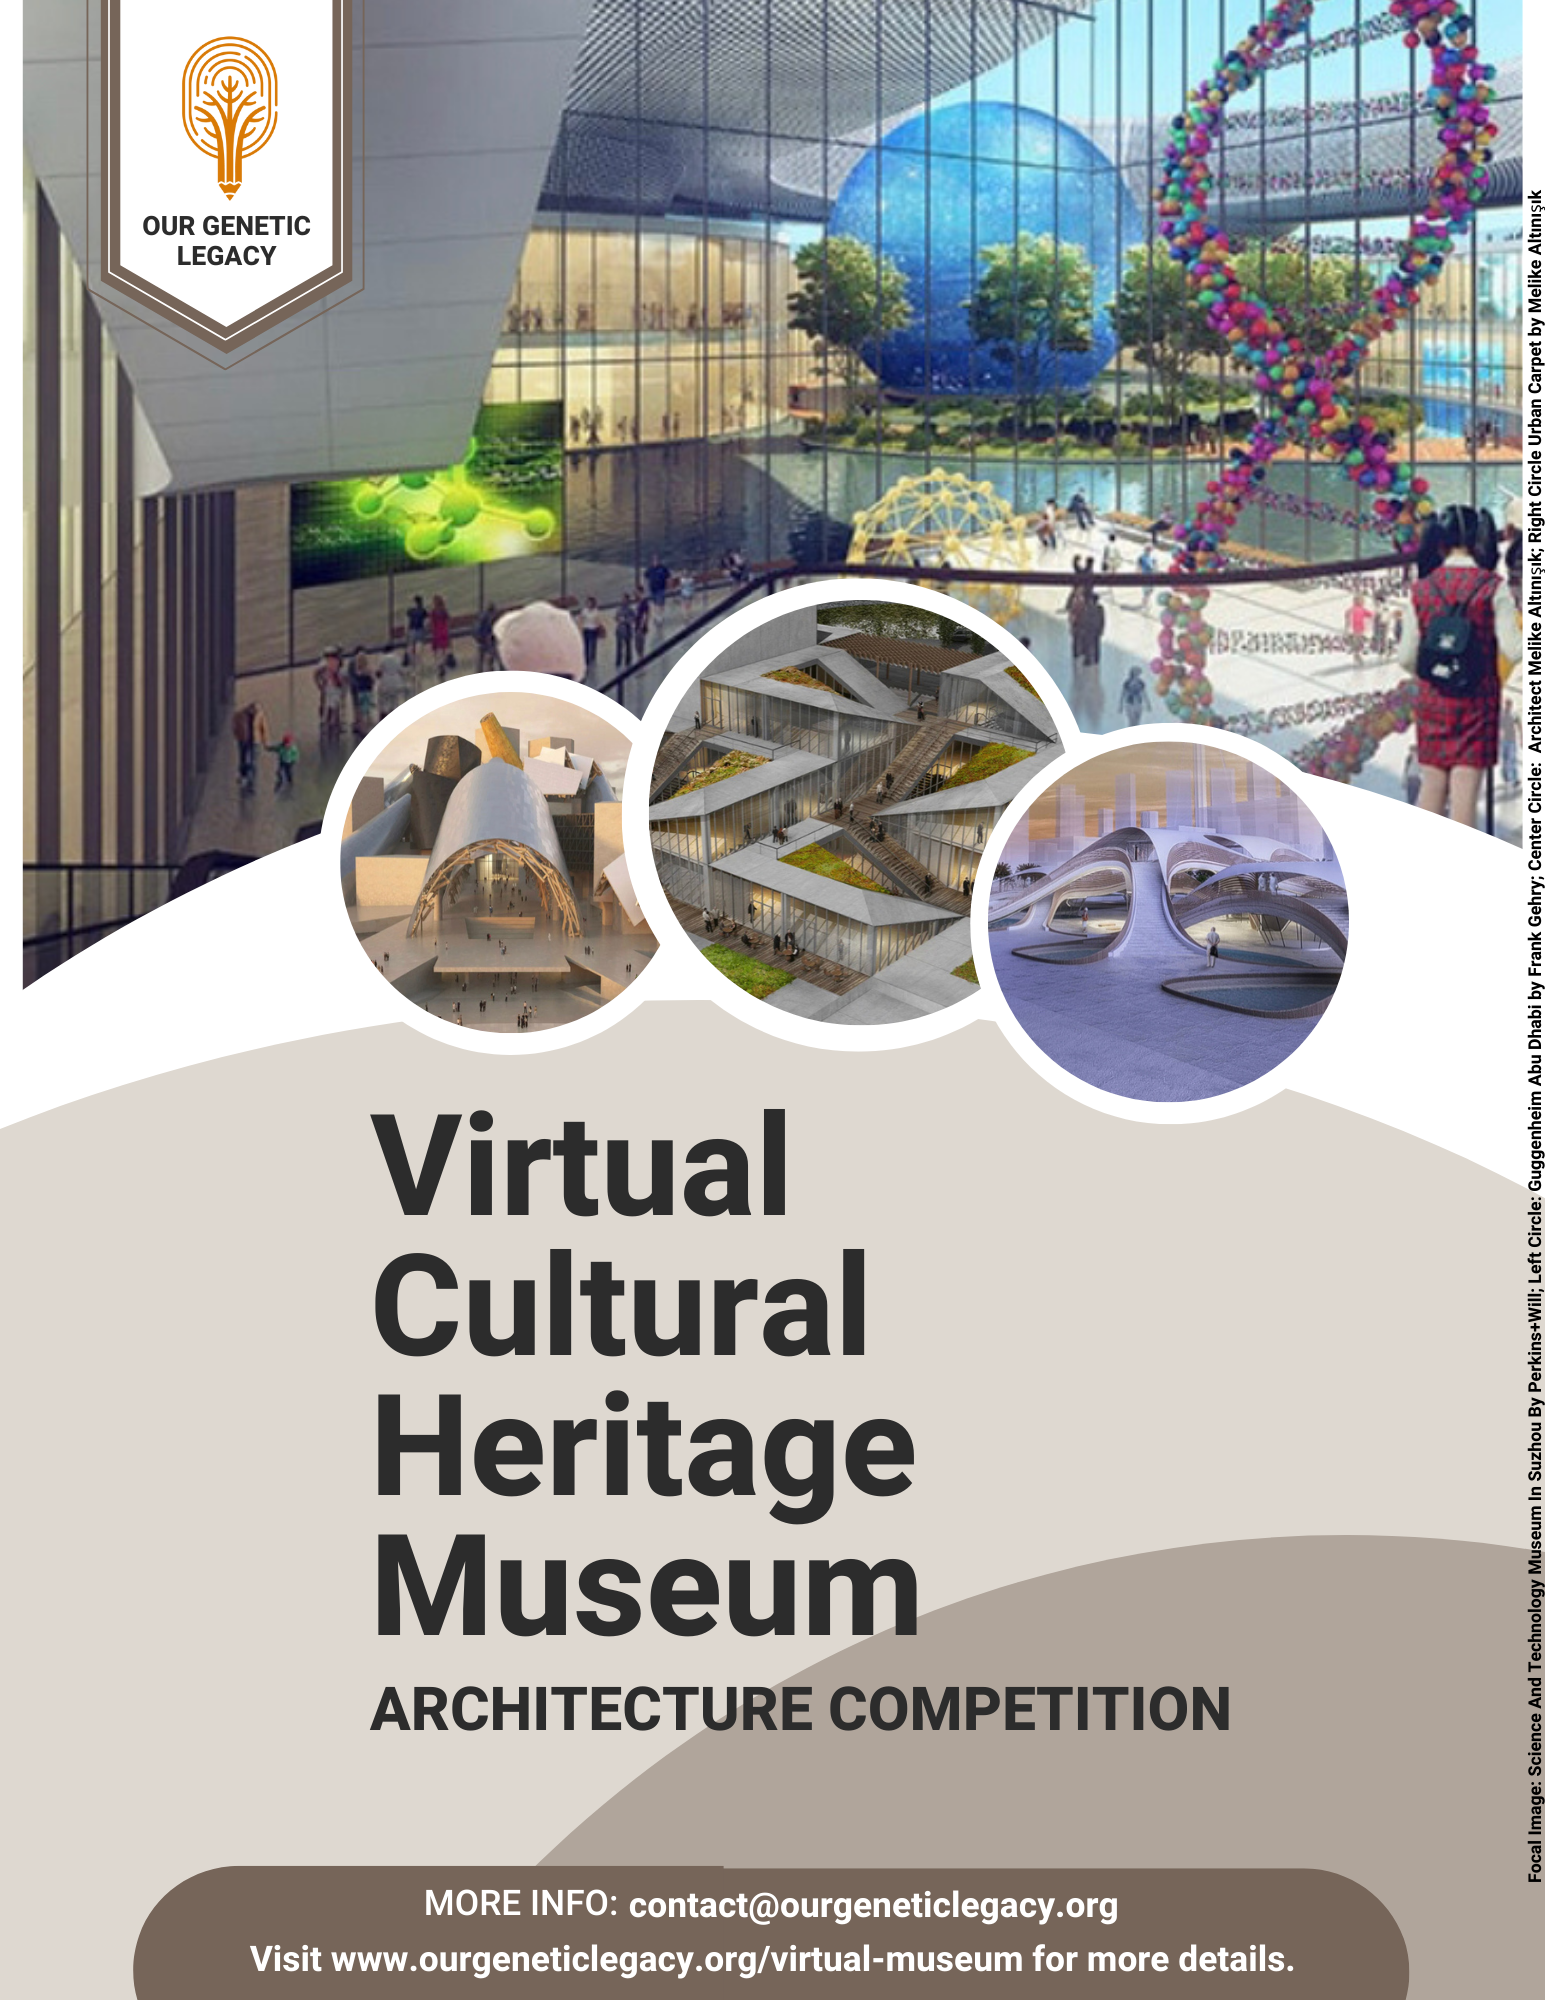 Call for Entries for San Diego’s First Virtual BIPOC History Museum